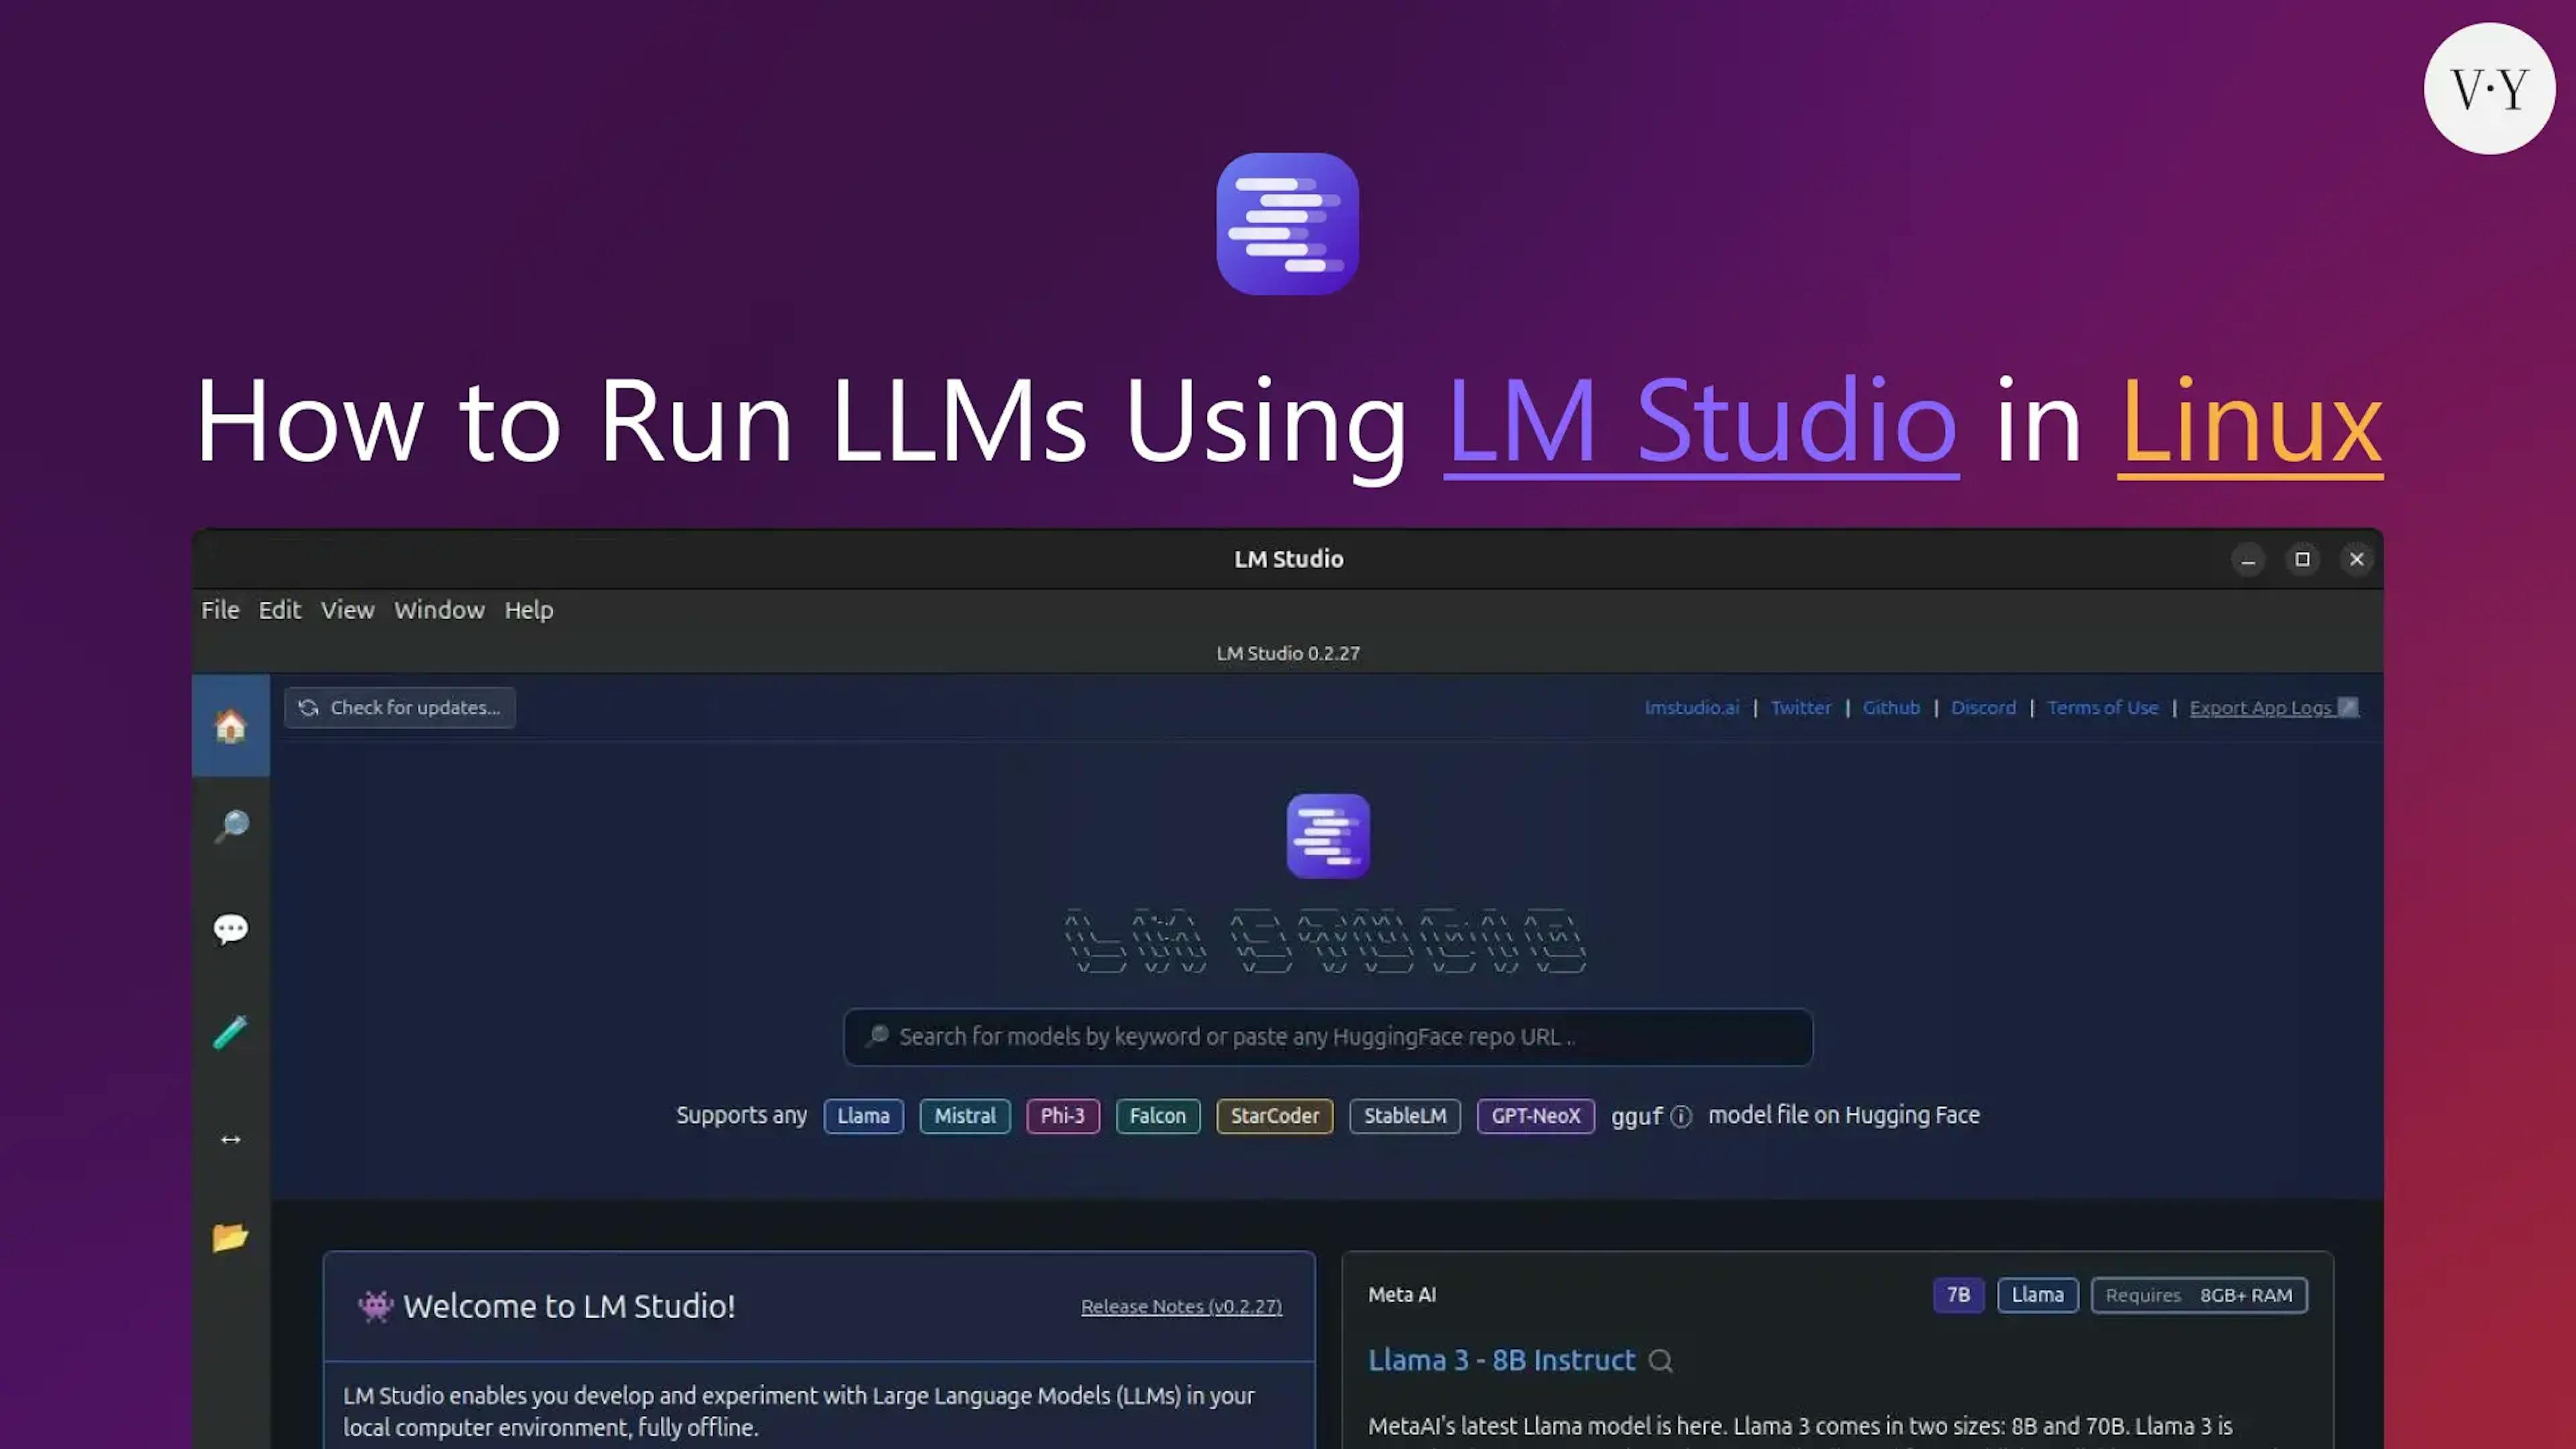 /how-to-run-llms-using-lm-studio-in-linux-for-beginners feature image